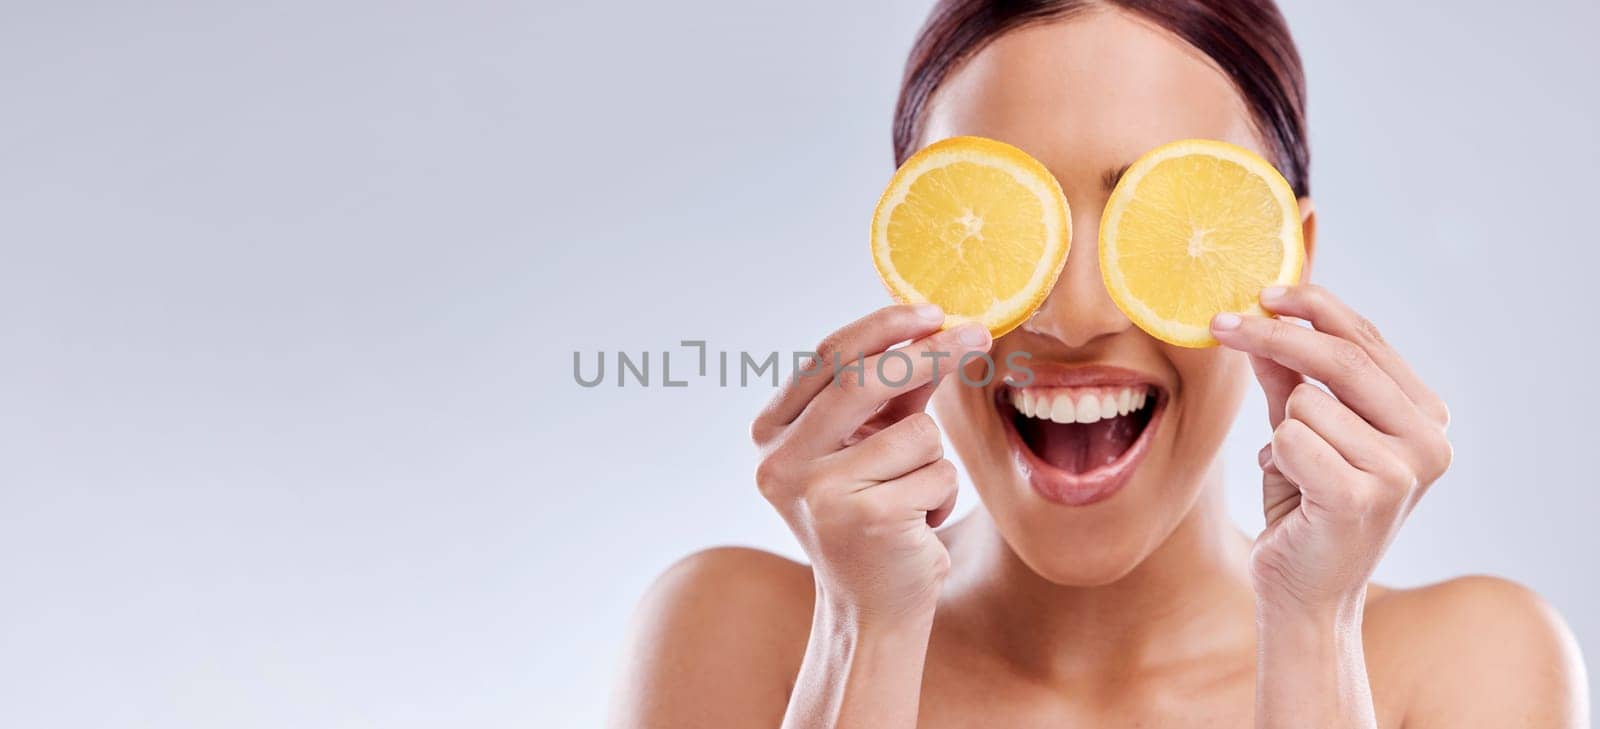 Skincare, mockup or happy woman with orange as natural facial with citrus or vitamin c for wellness. Studio background, smile or healthy girl model smiling with organic fruits for dermatology beauty.